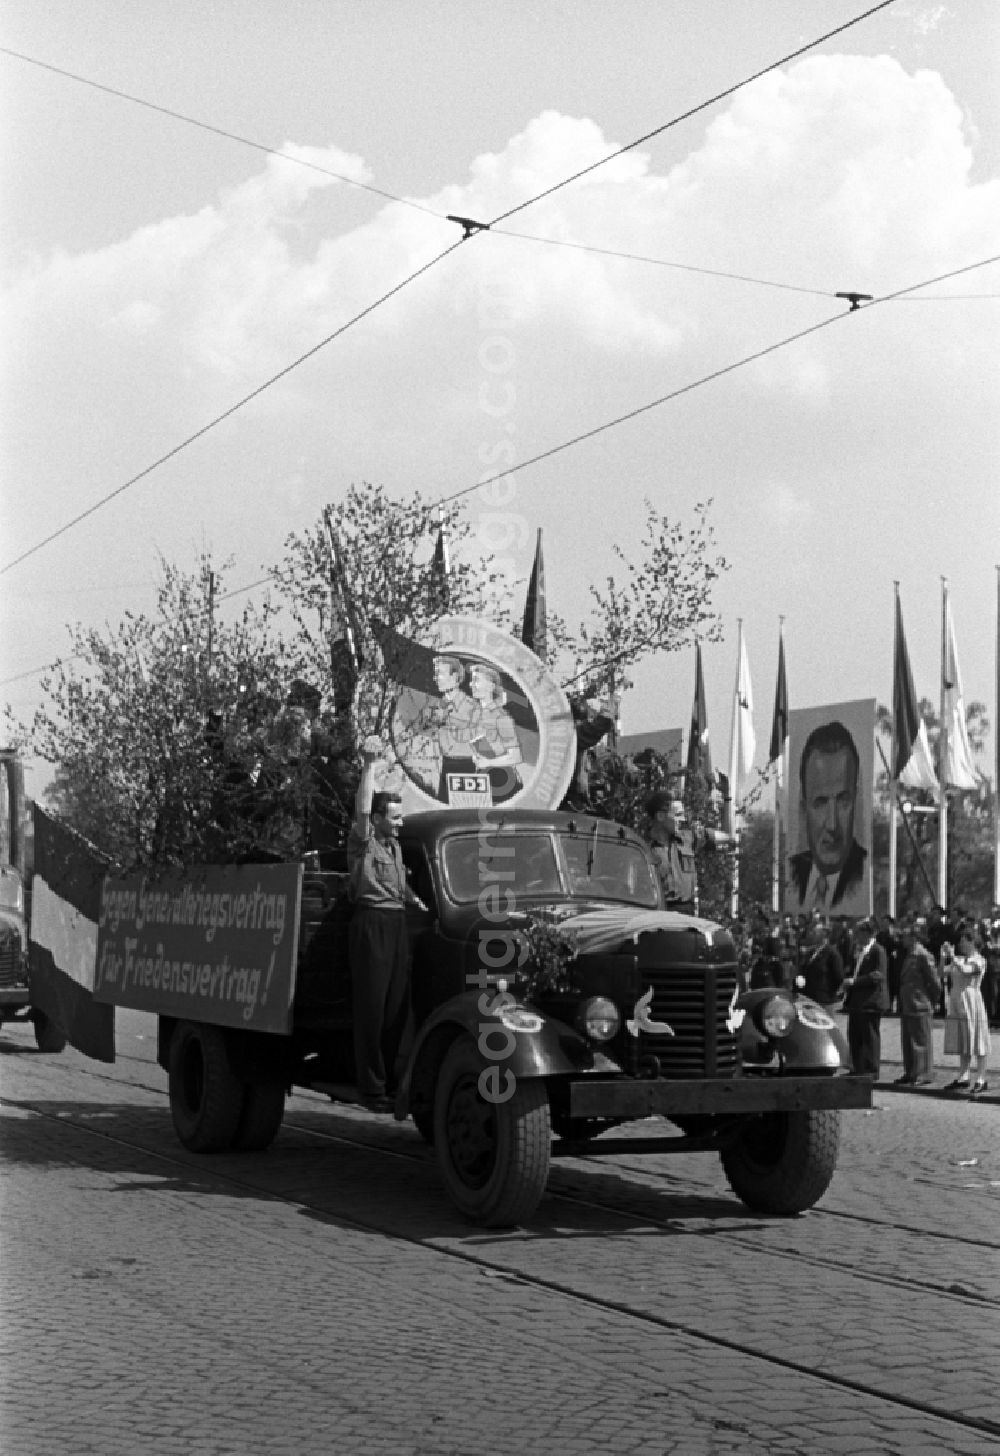 GDR image archive: Dresden - Protest poster and banner slogan Against a general war treaty for a peace treaty carried by young members of the FDJ on a Russian truck in Dresden, Saxony on the territory of the former GDR, German Democratic Republic